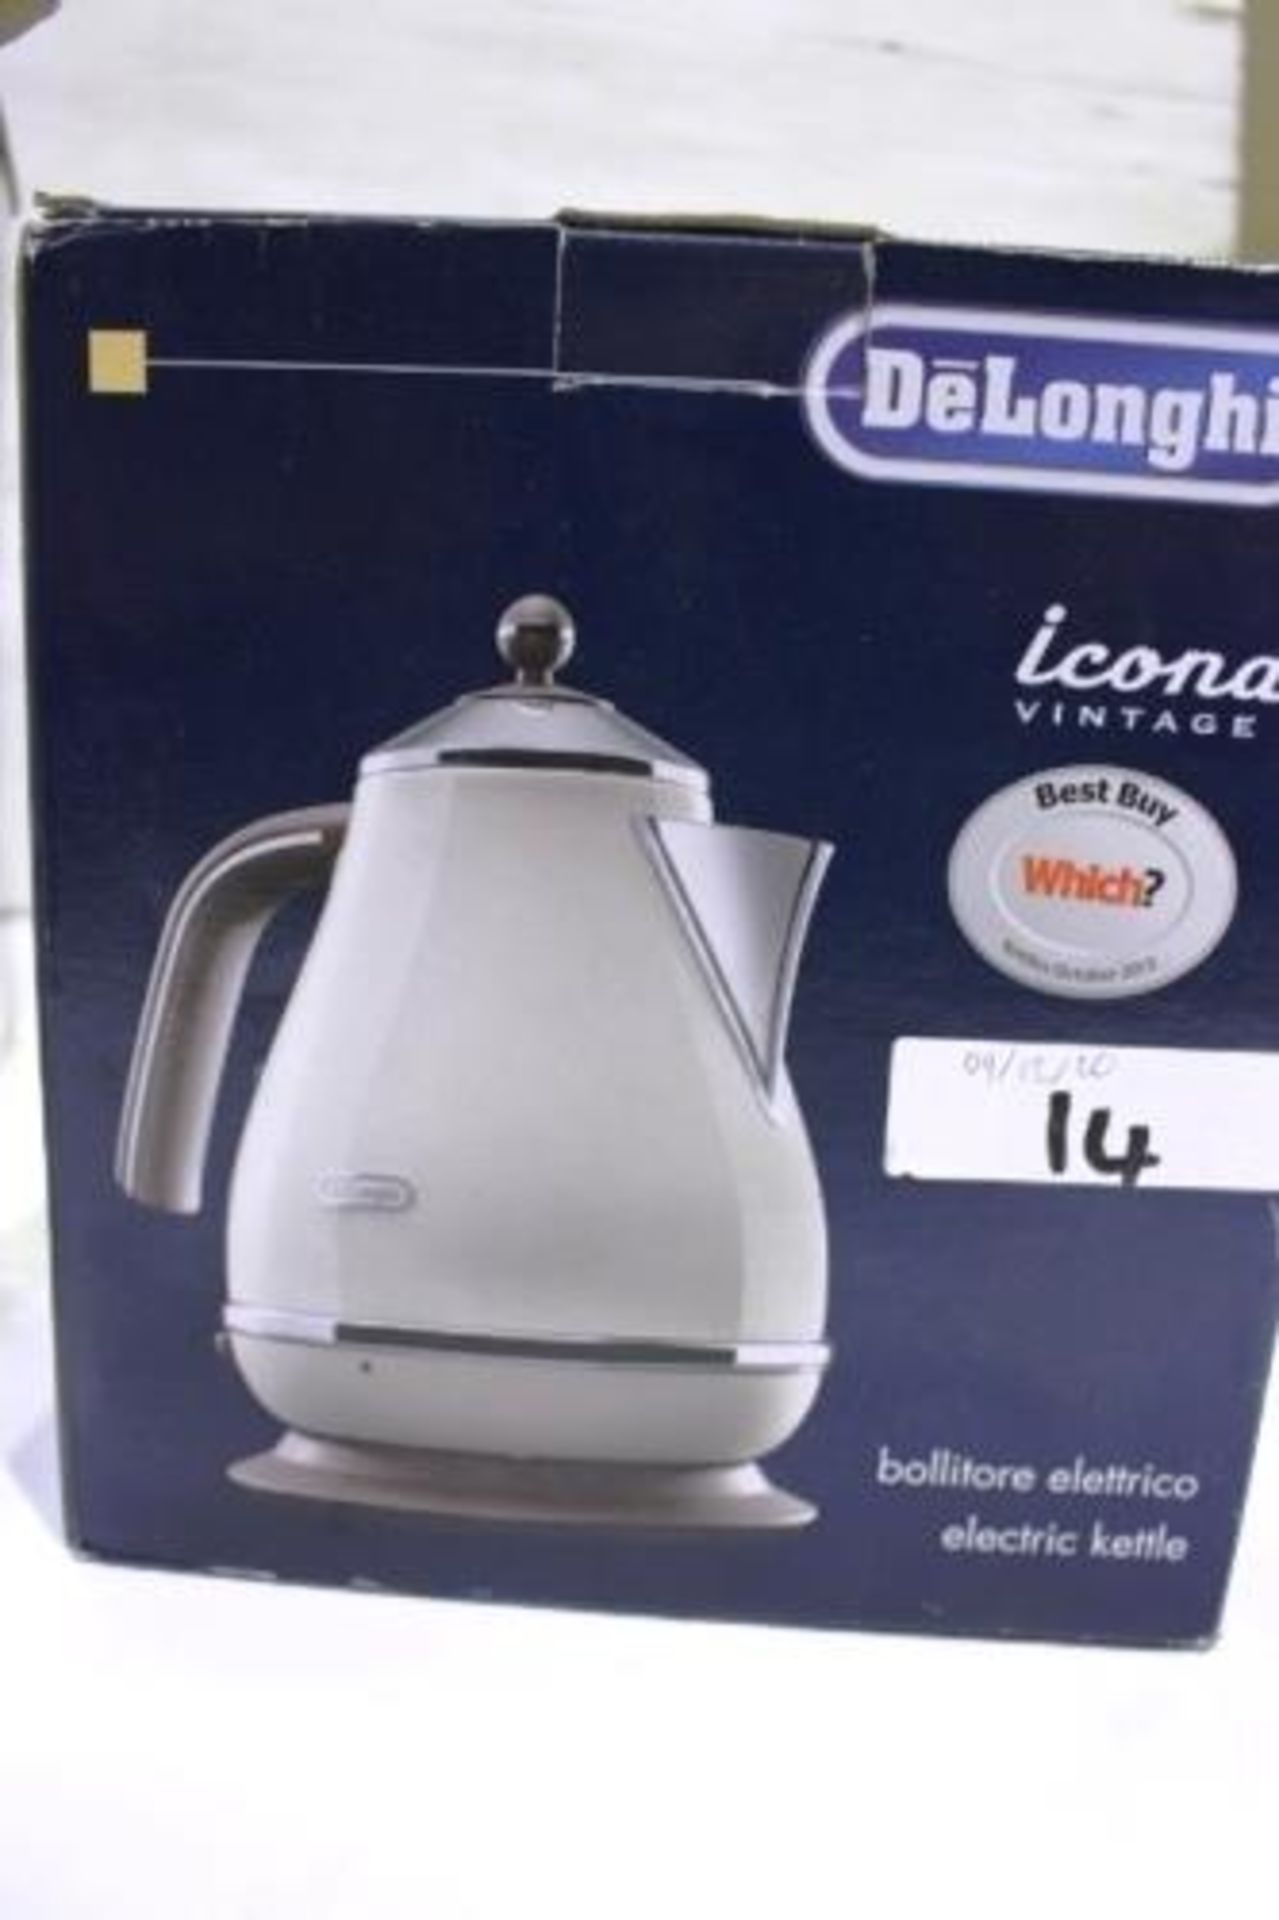 3 x Dunlop Teppanyaki electric grills, model 12044, together with Delonghi Icona kettle, model - Image 2 of 4